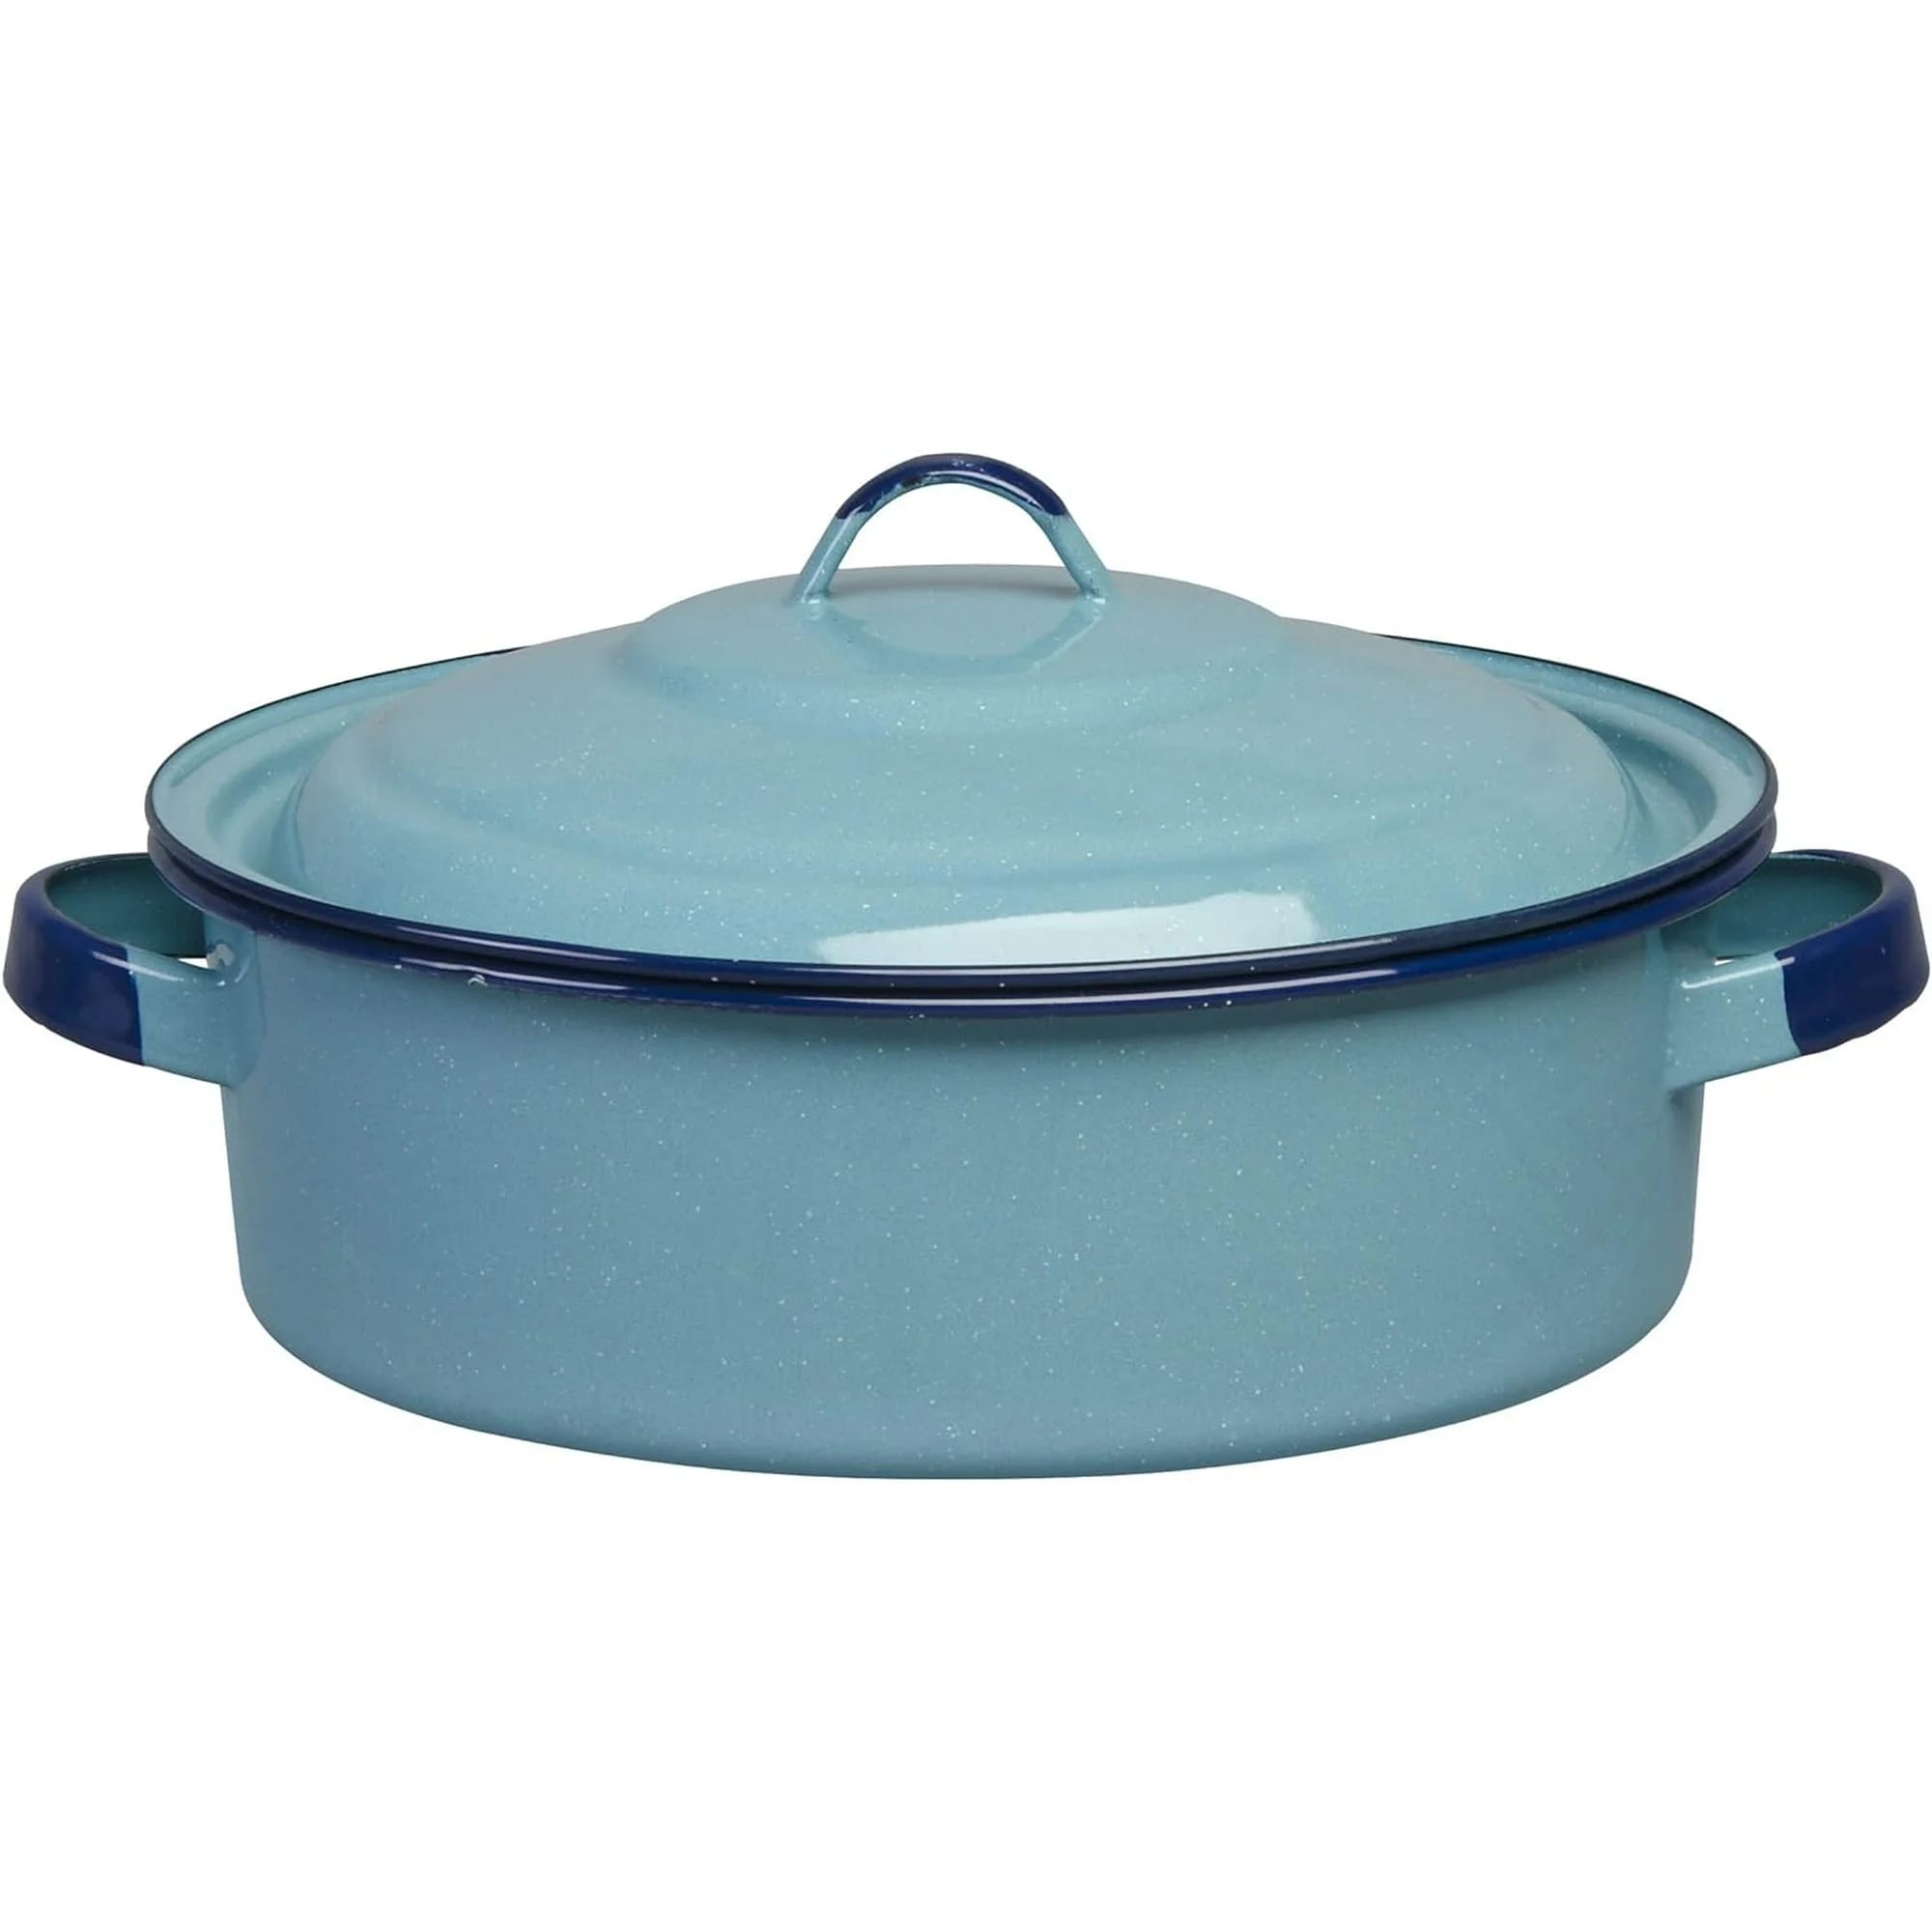 https://ak1.ostkcdn.com/images/products/is/images/direct/52c2568a892e0850f205042d19655fded9267d90/Cinsa-Authentic-Hispanic-Dutch-Oven-with-Lid%2C-5-Quart.jpg